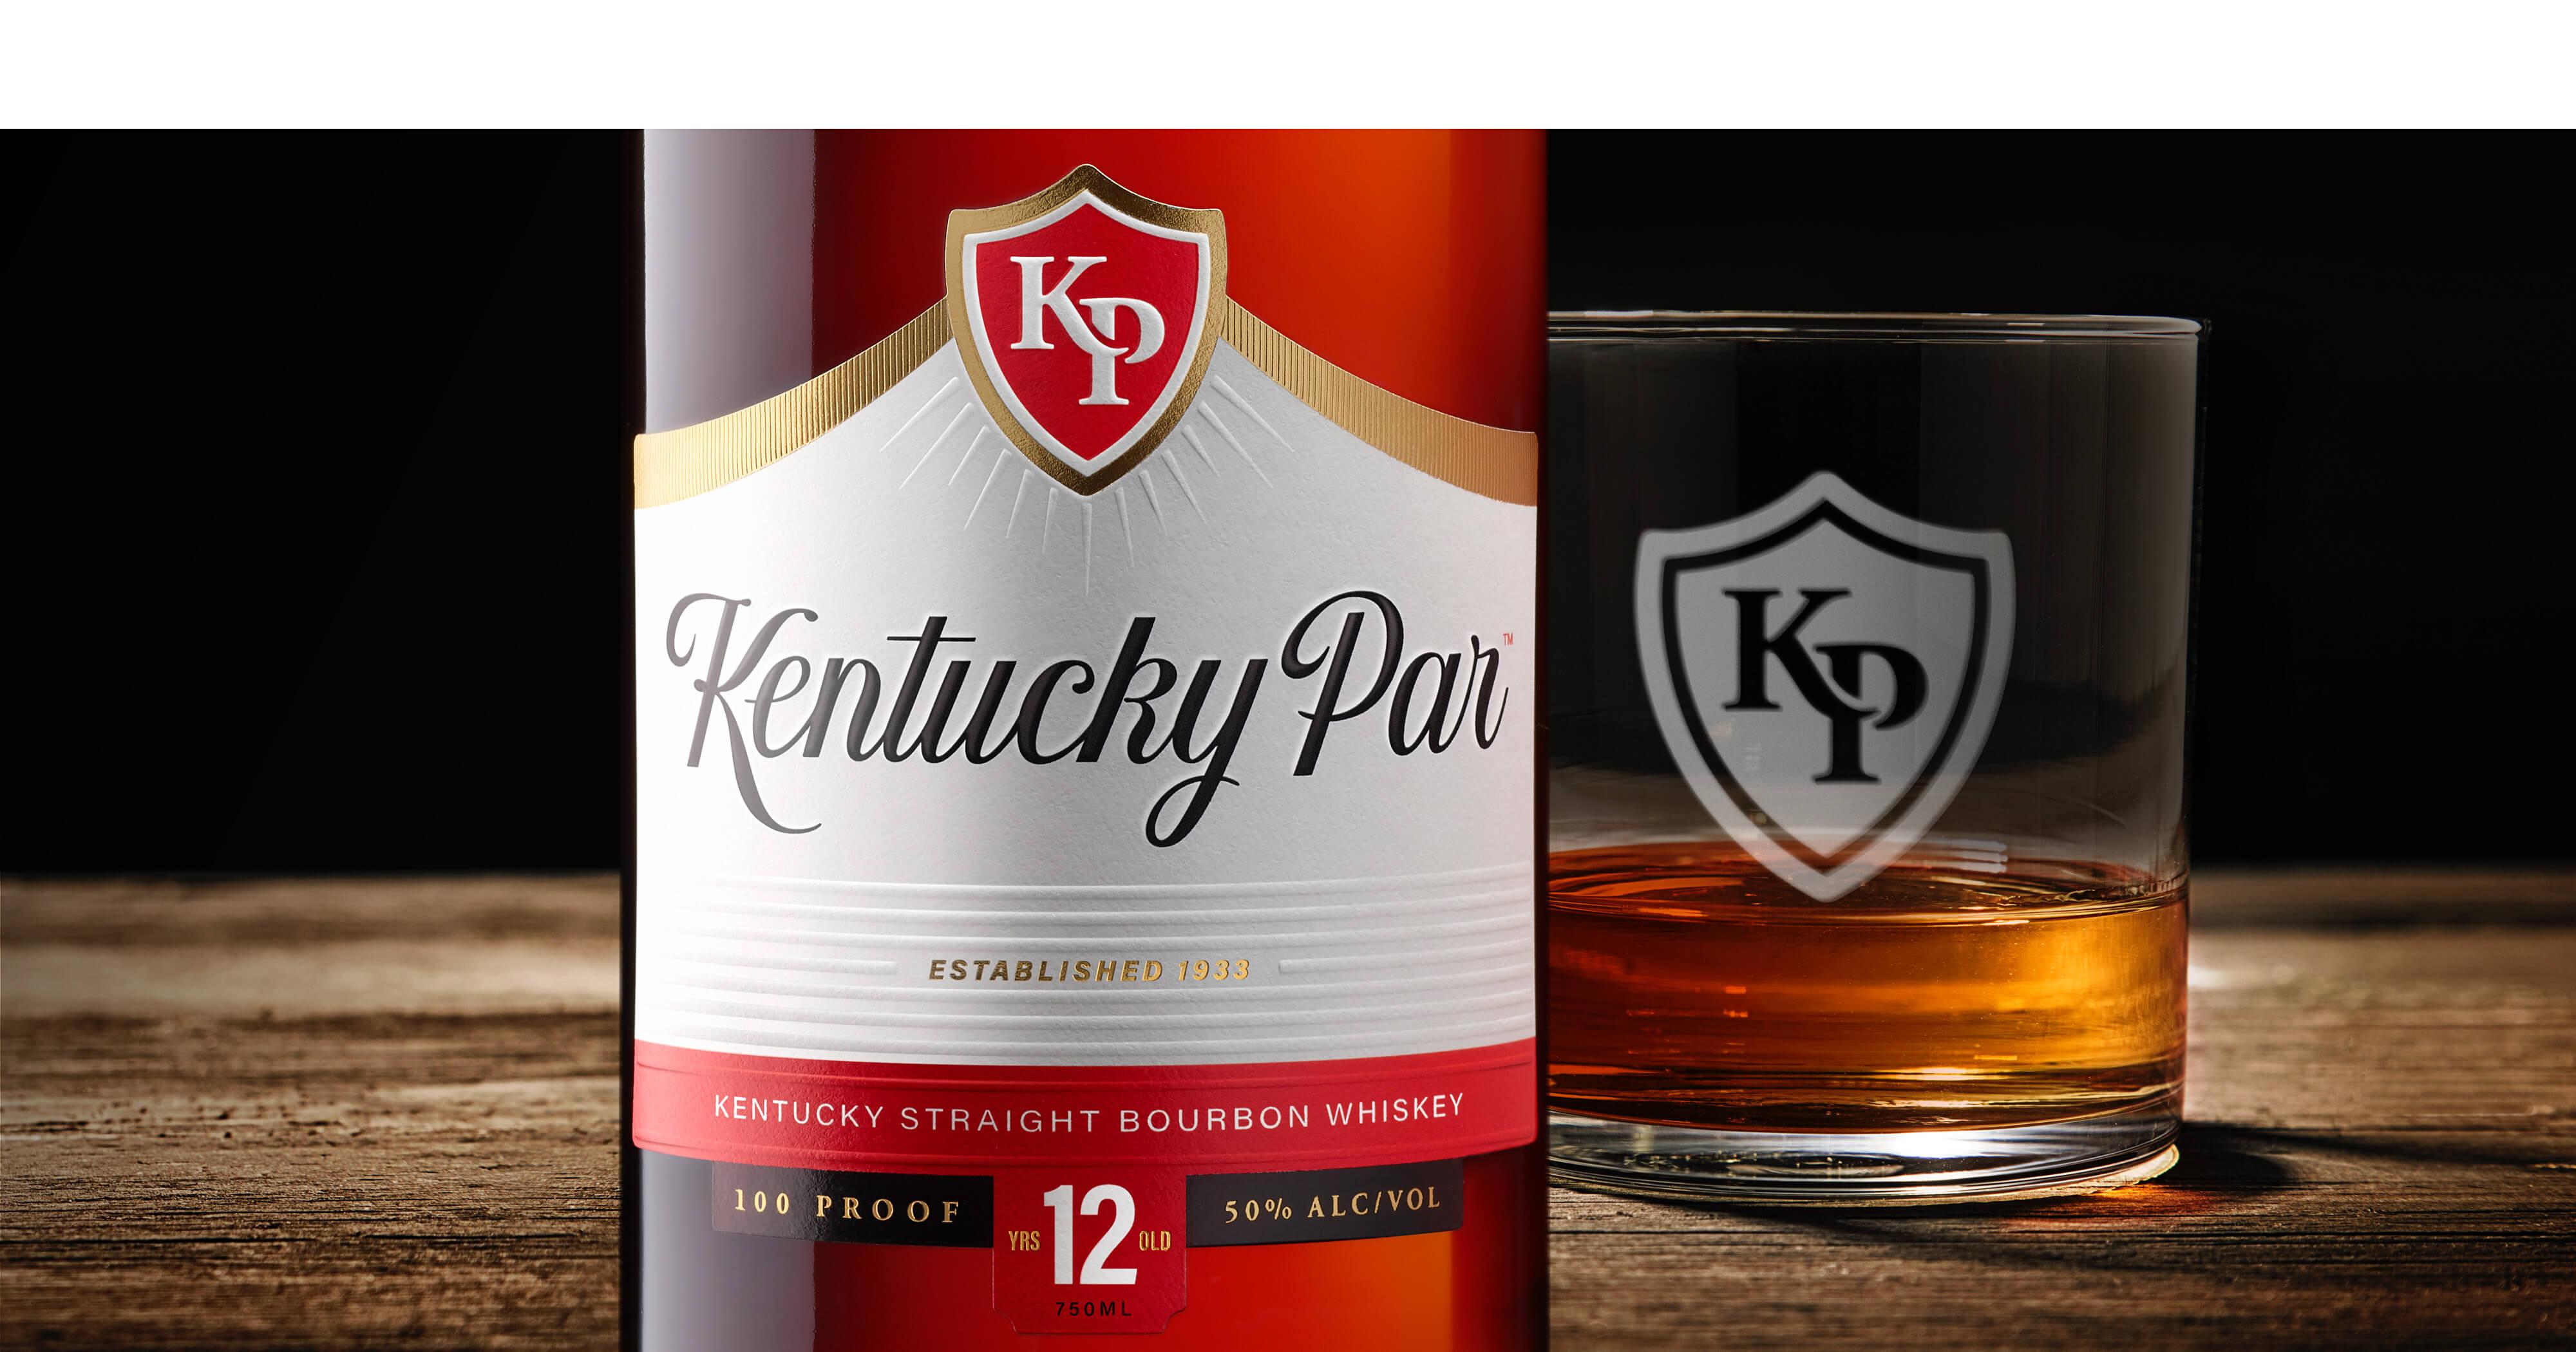 Kentucky Par label and glass image